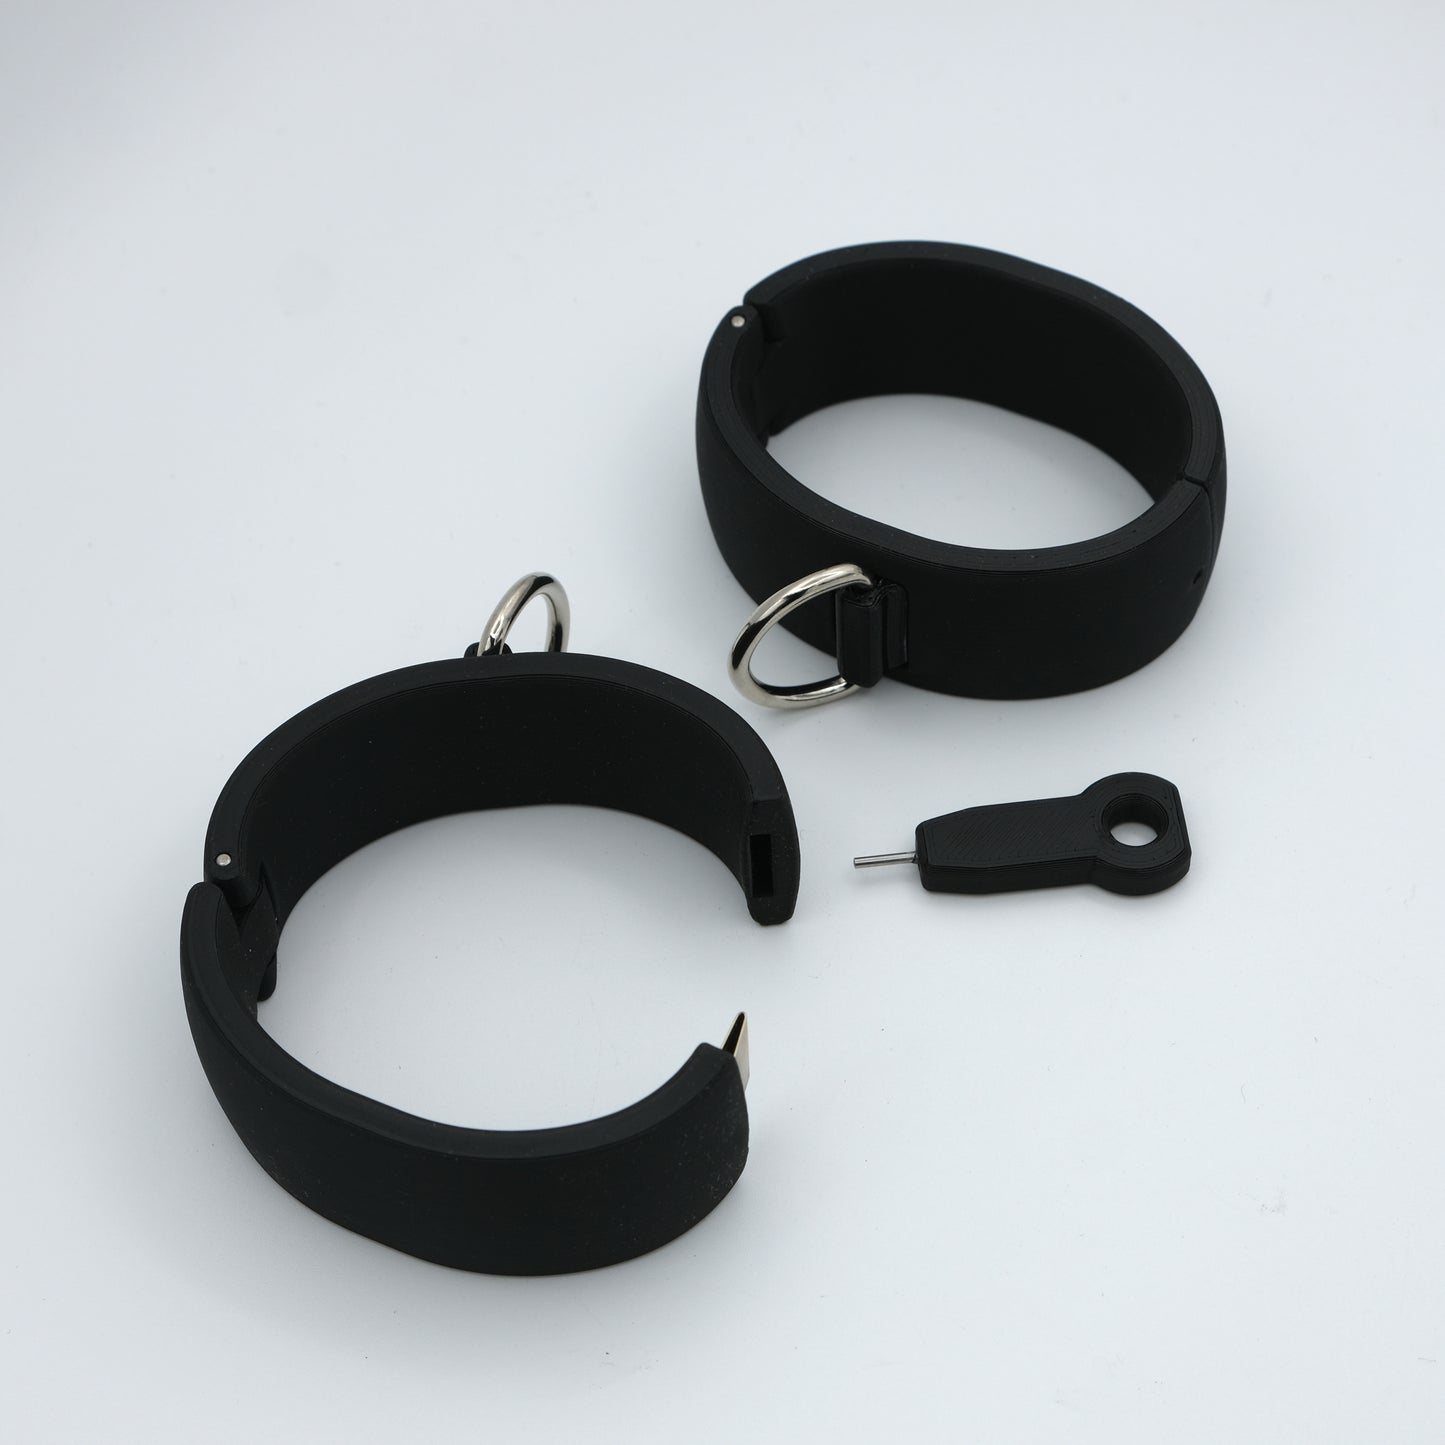 Quick-Shackles - custom made handcuffs with D-ring and click fastener